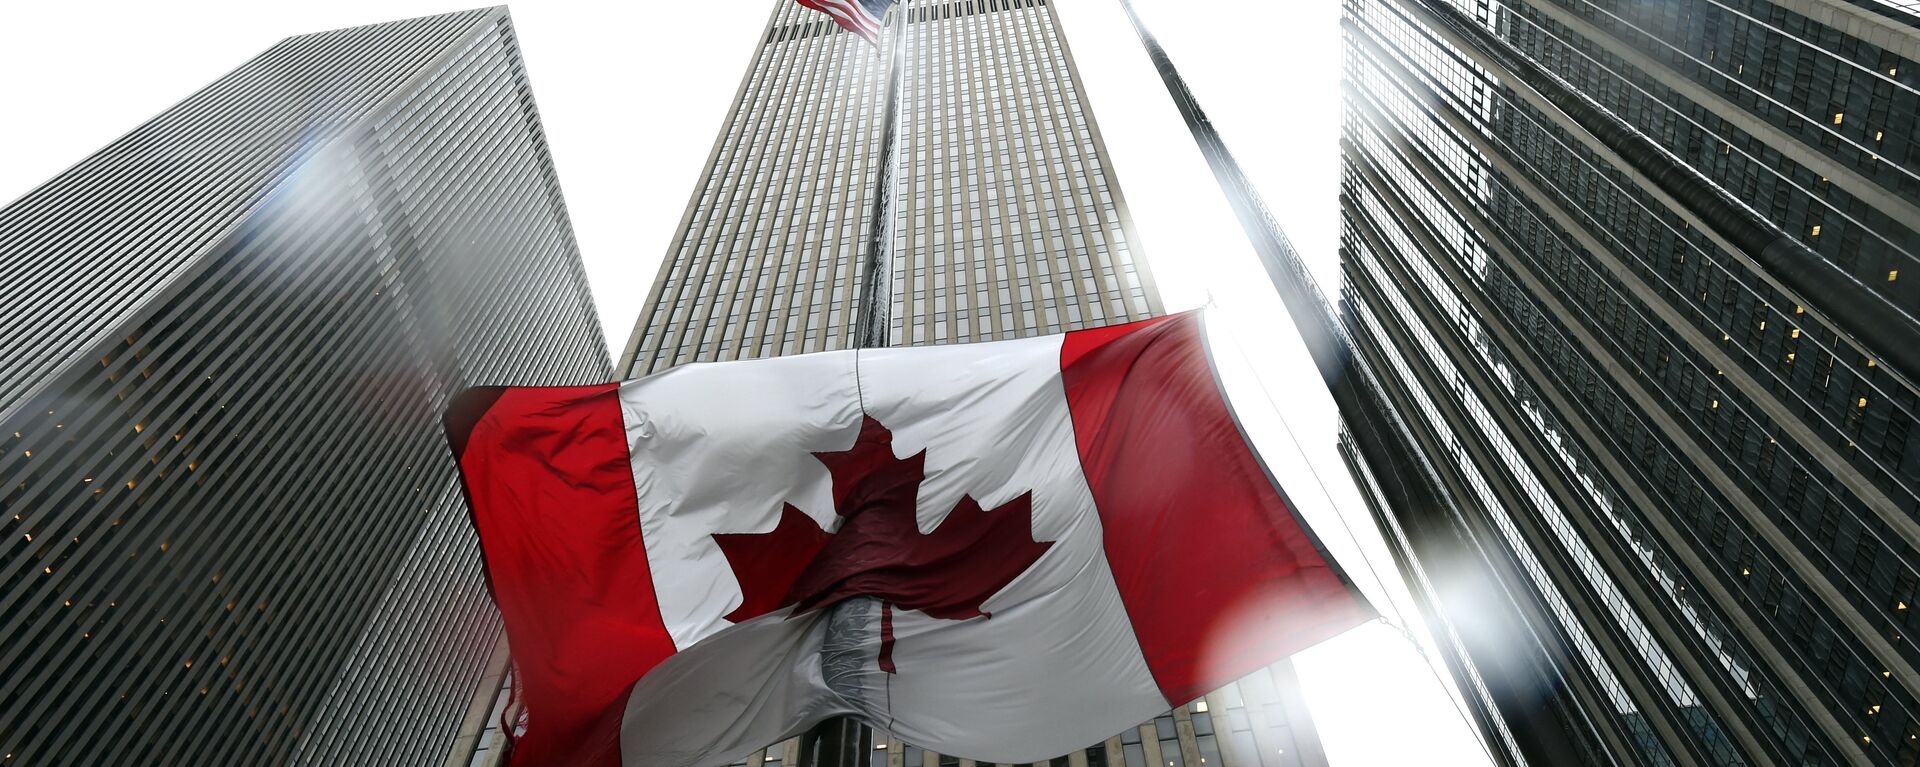 The Canadian flag flies at half-mast at the Consulate General of Canada in New York October 23, 2014. - Sputnik International, 1920, 29.10.2022